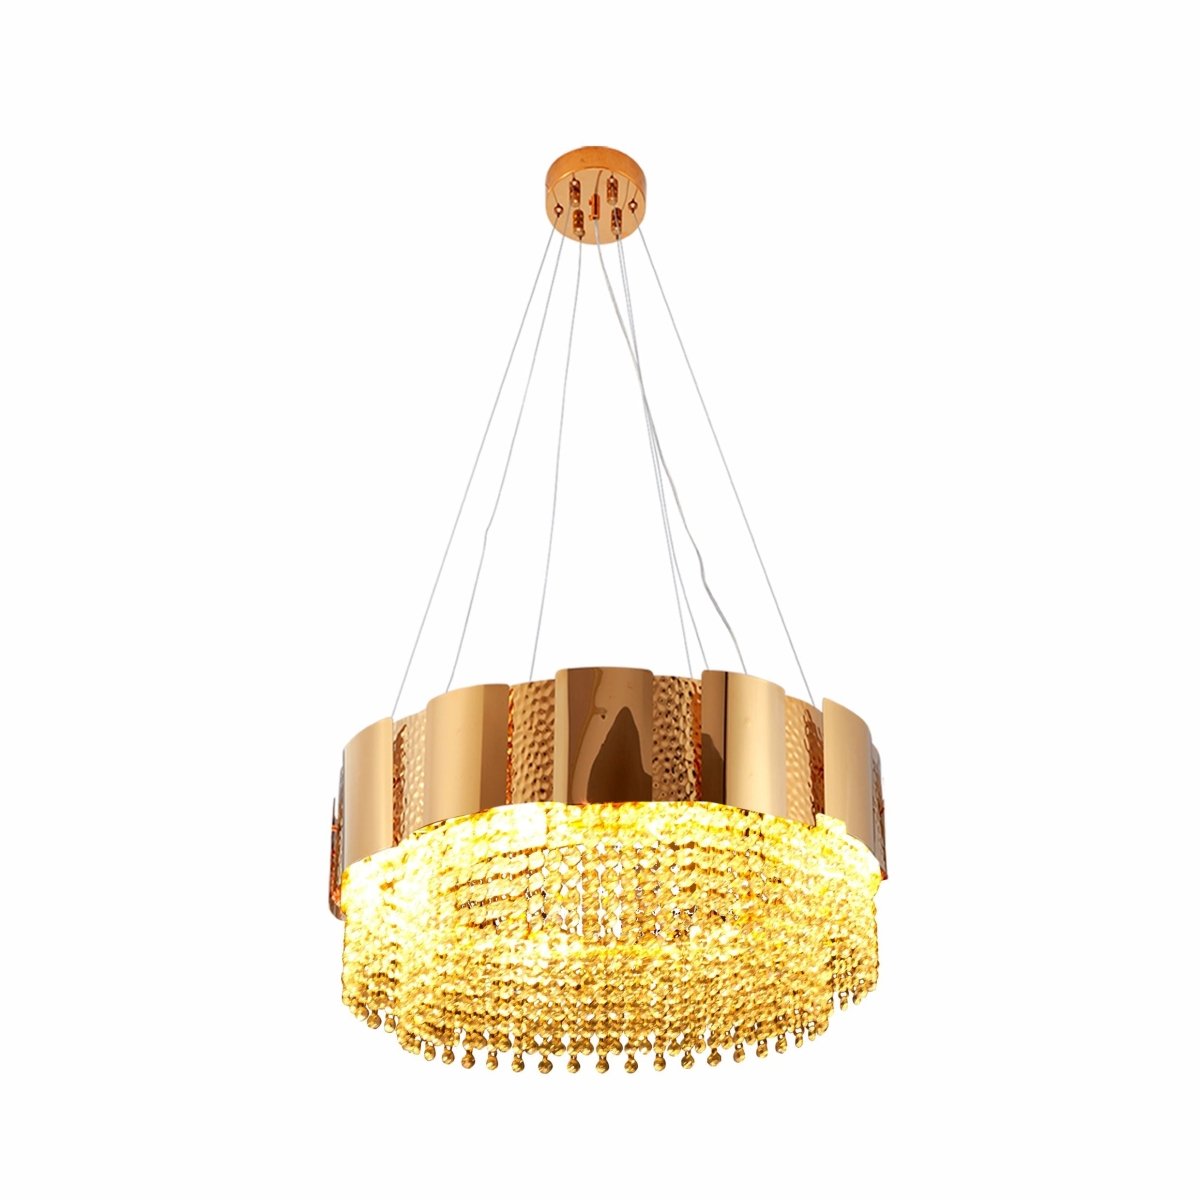 Main image of Octagon Crystal Gold Metal Chandelier D600 with 8xE14 Fitting | TEKLED 156-19576